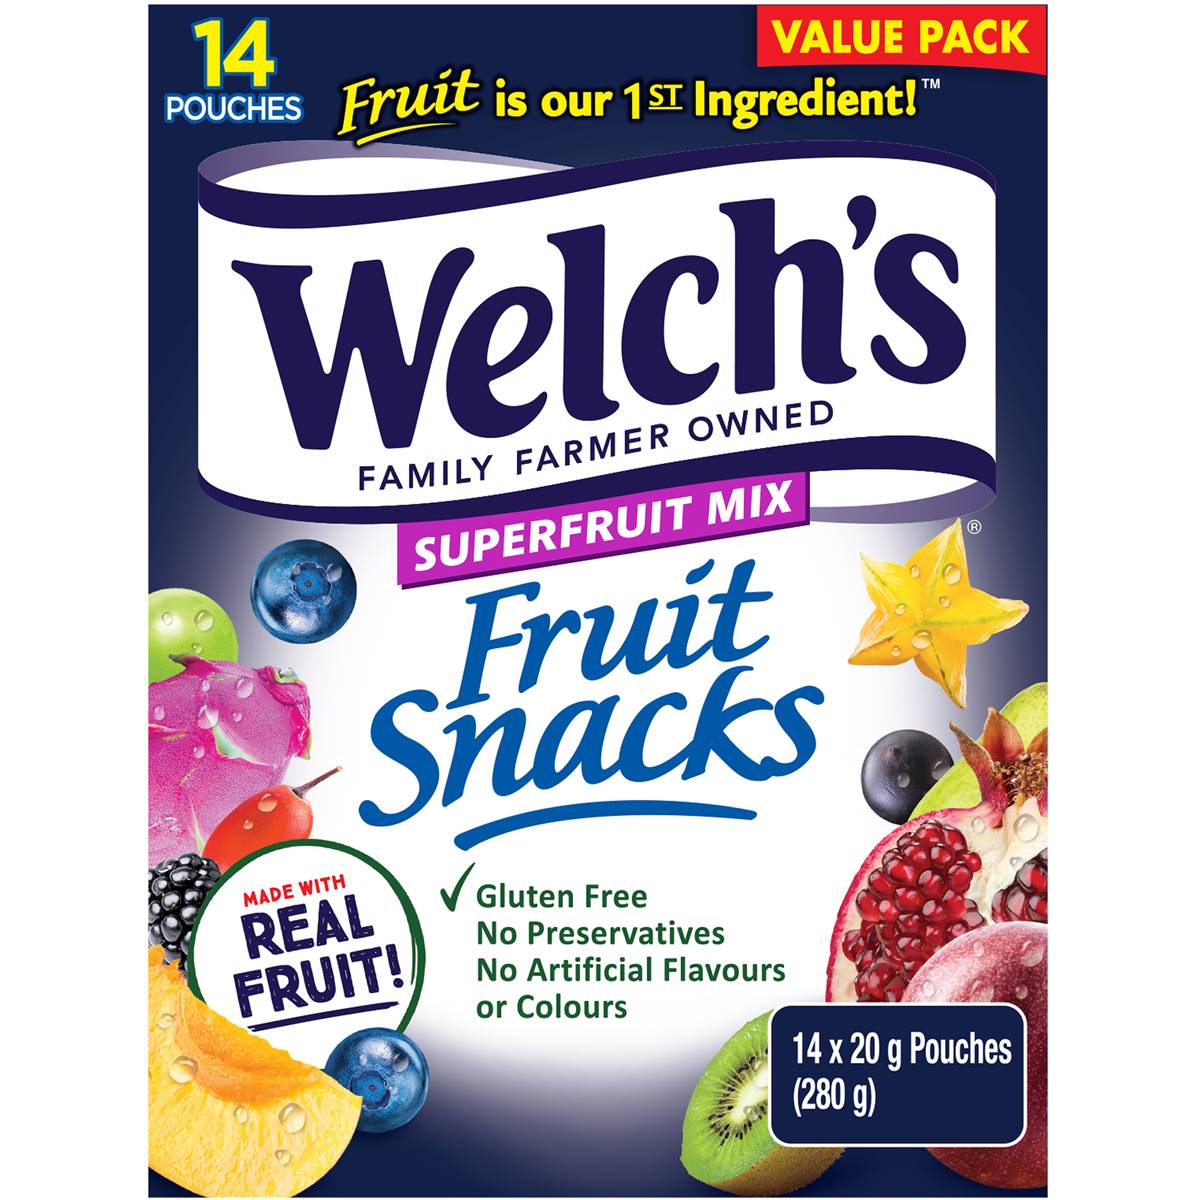 Calories in Welch's Superfruit Mix Fruit Snack Pouches